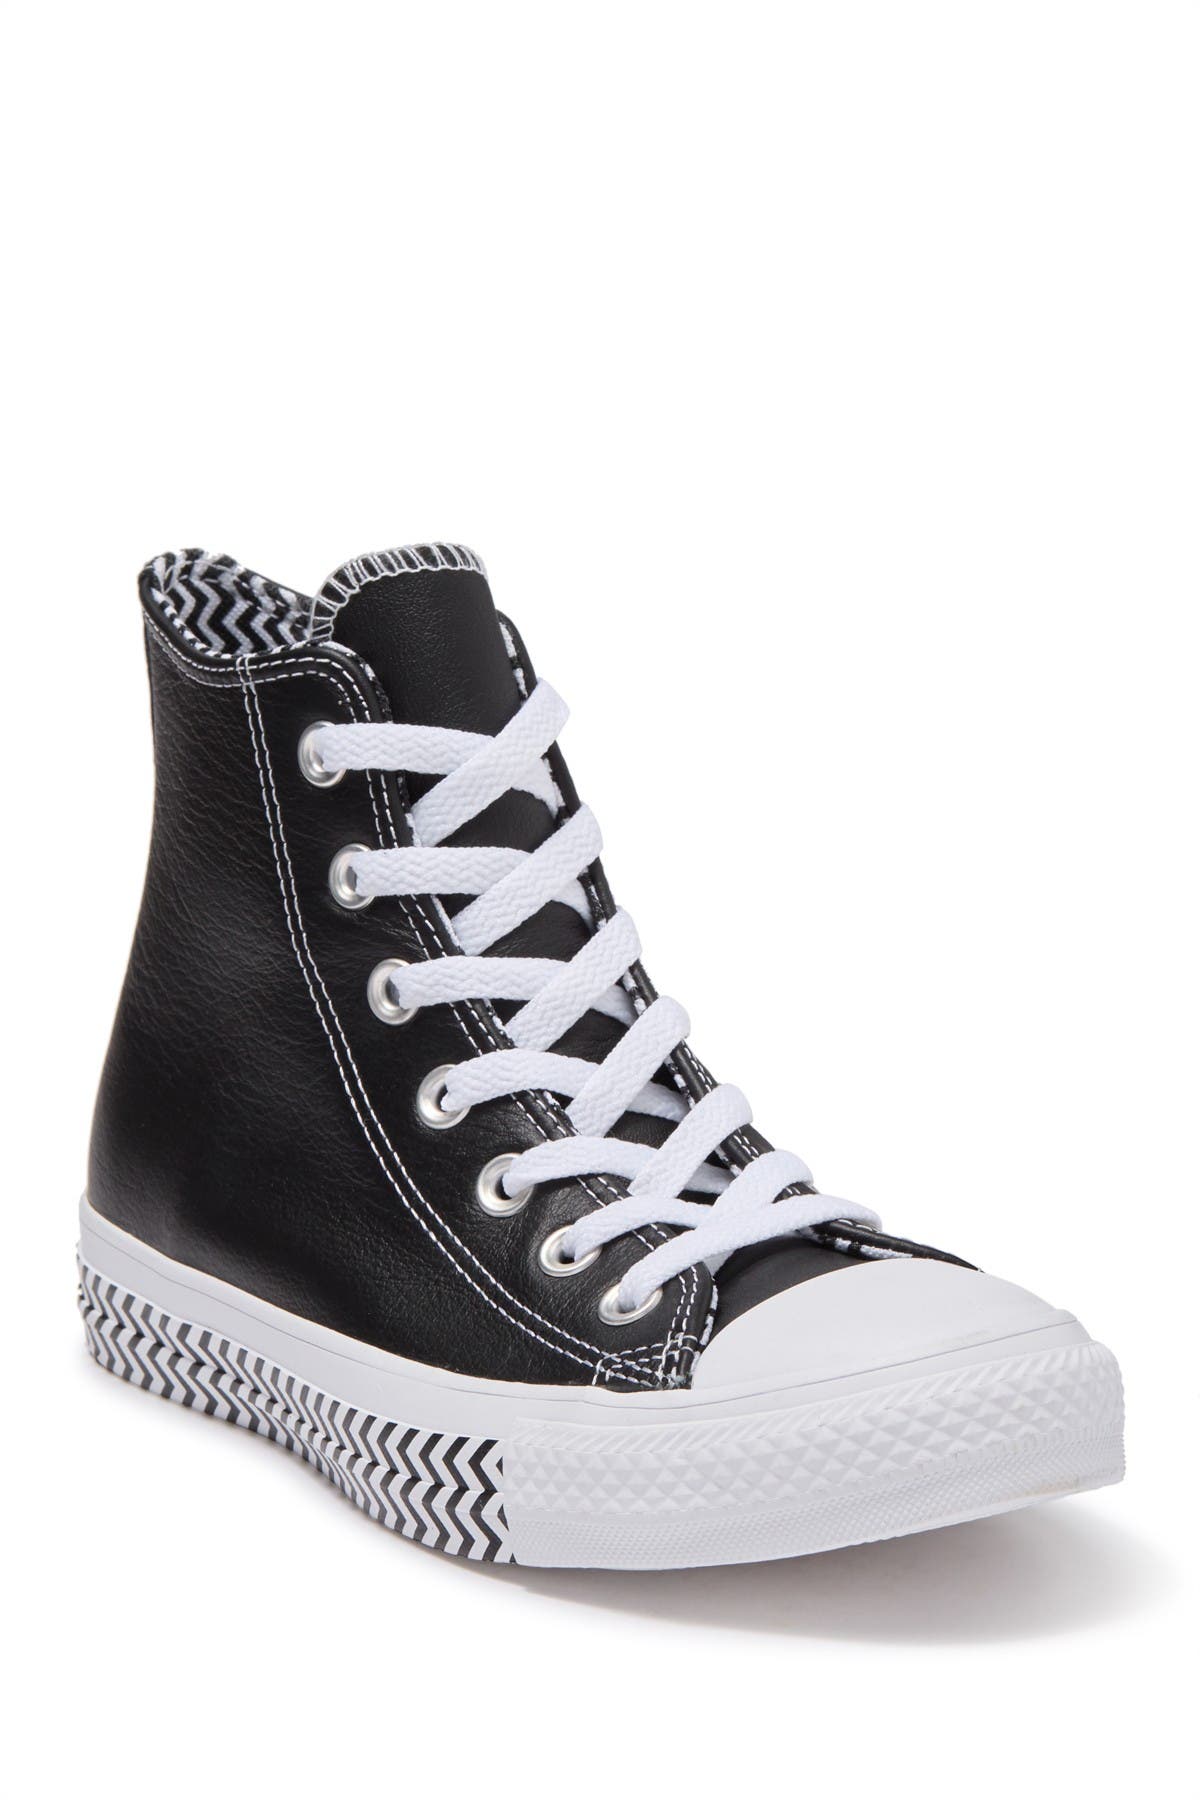 Converse Mission V High Top Faux Leather Zig Zag Sneaker In Black ...